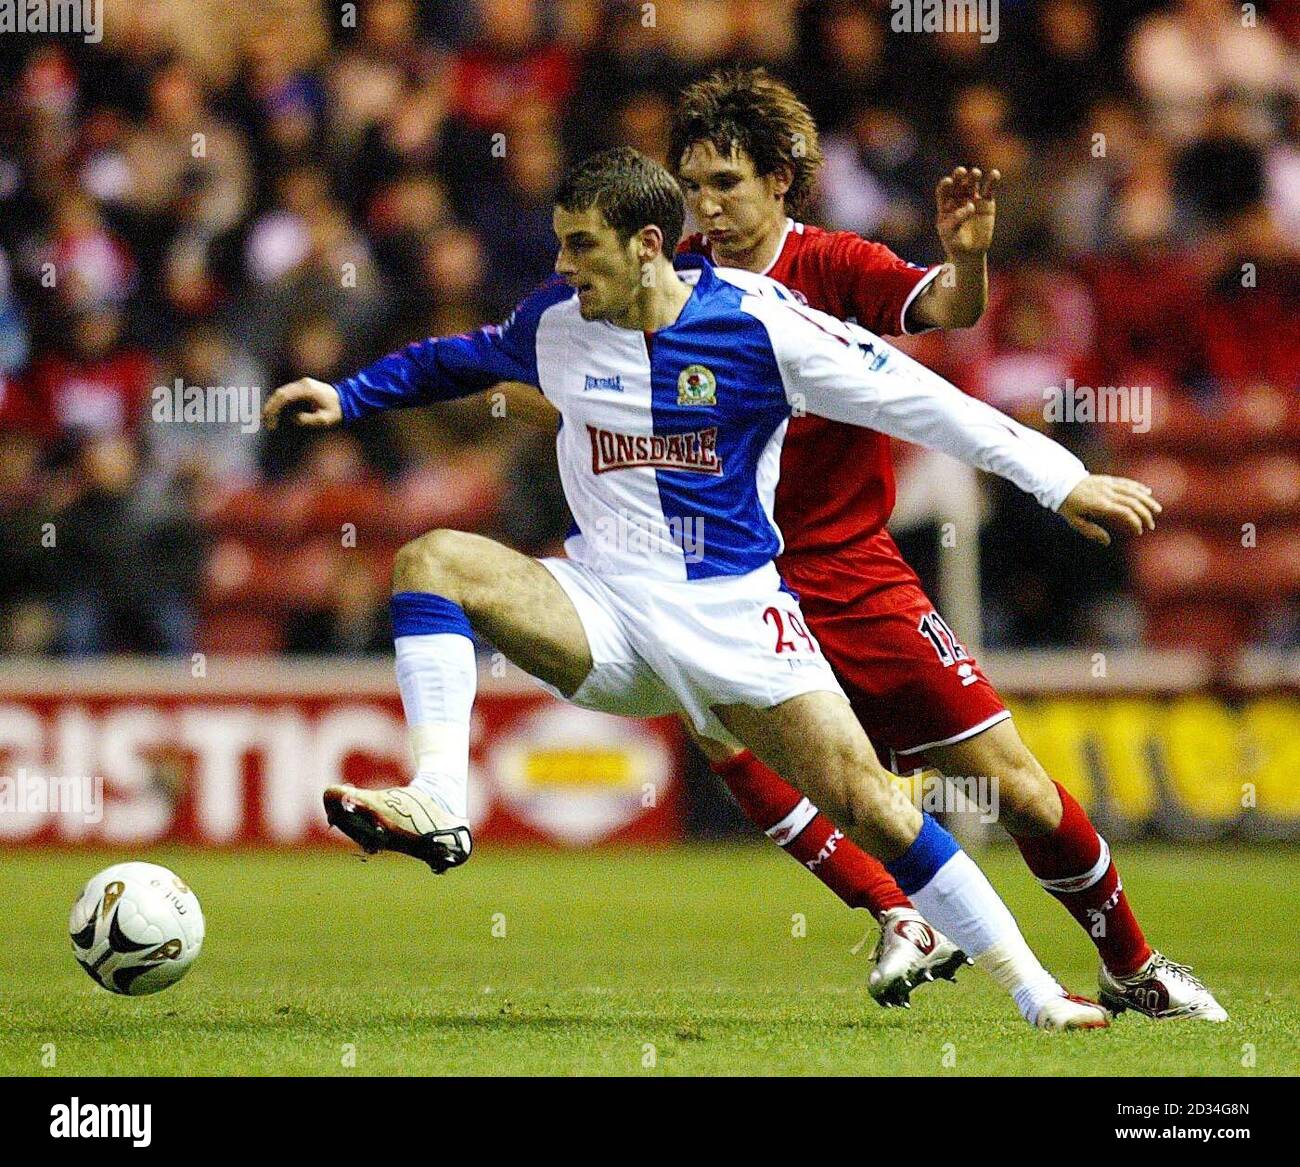 Middlesbrough's Emanual Pogatetz (R) battles with Blackburn Rovers' David Bentley for the ball during the Carling Cup quarter final match at the Riverside Stadium, Middlesbrough, Wednesday December 21, 2005. PRESS ASSOCIATION Photo. Photo credit should read: Owen Humphreys/PA. Stock Photo